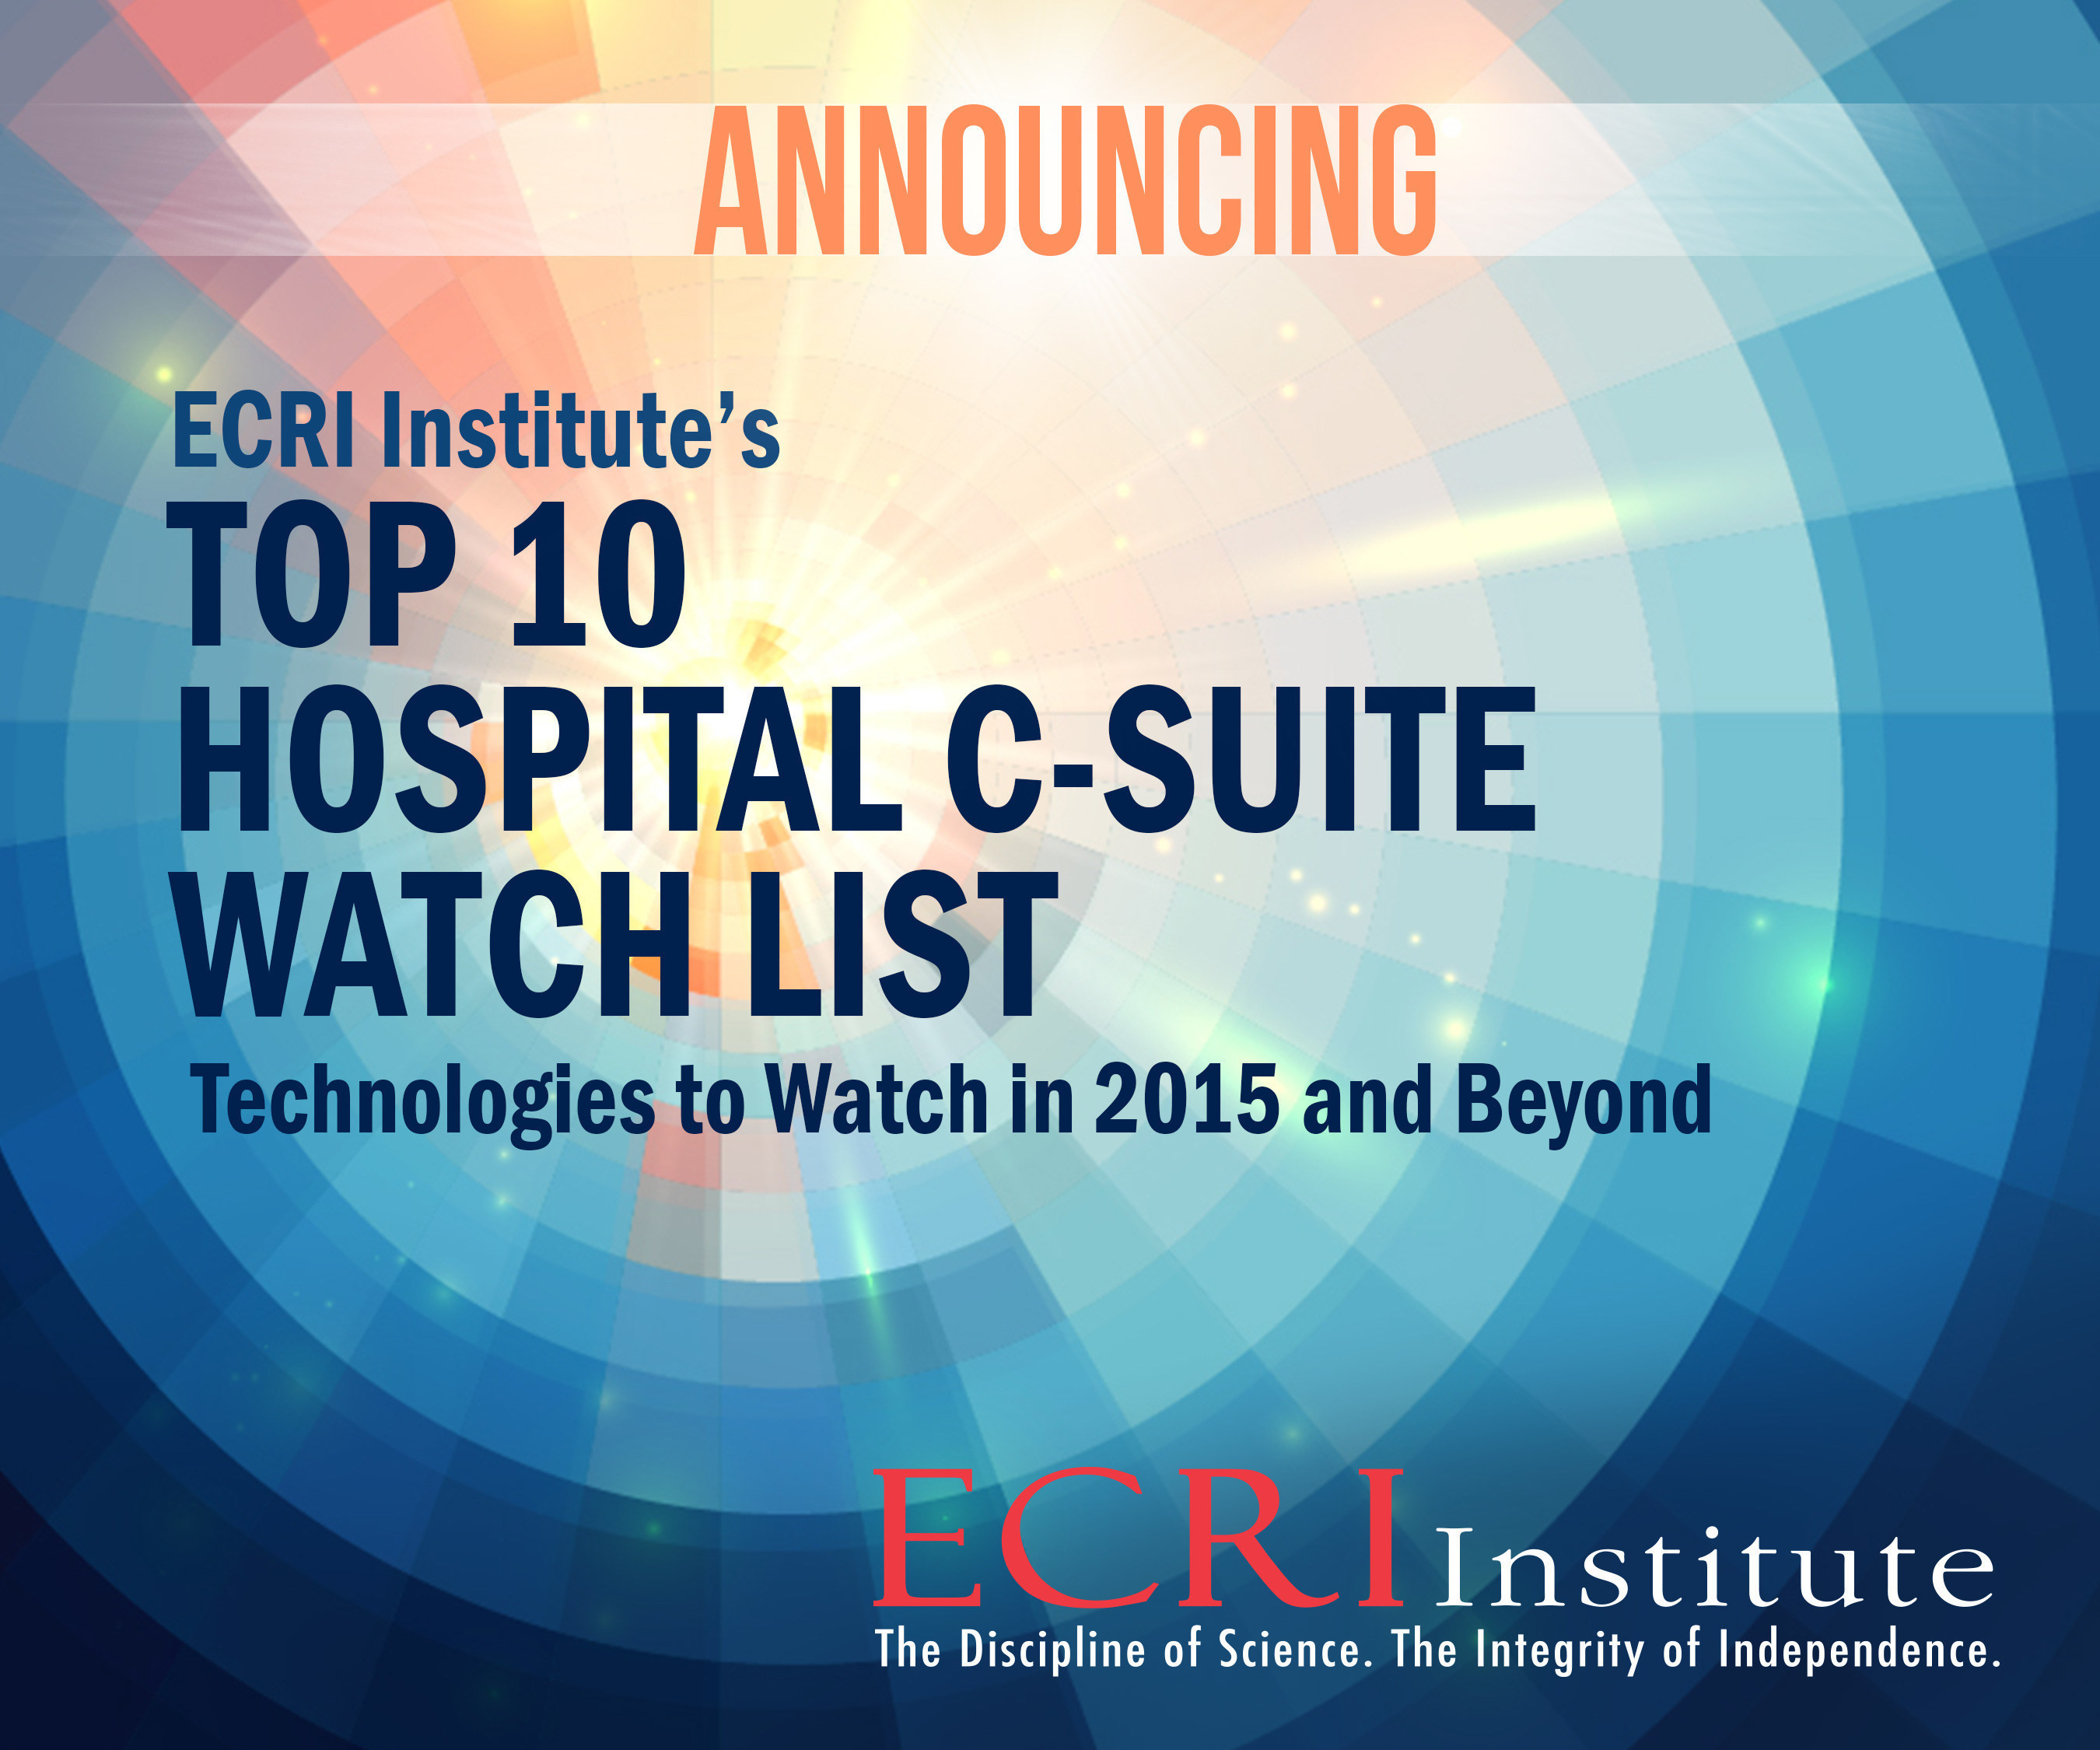 ECRI Institute's 2015 Top 10 Hospital C-Suite Watch List, available as a free public service, answers key questions on new and emerging health technologies that potentially provide new ways to treat patients, improve care, and reduce costs. Download now at www.ecri.org/2015watchlist.